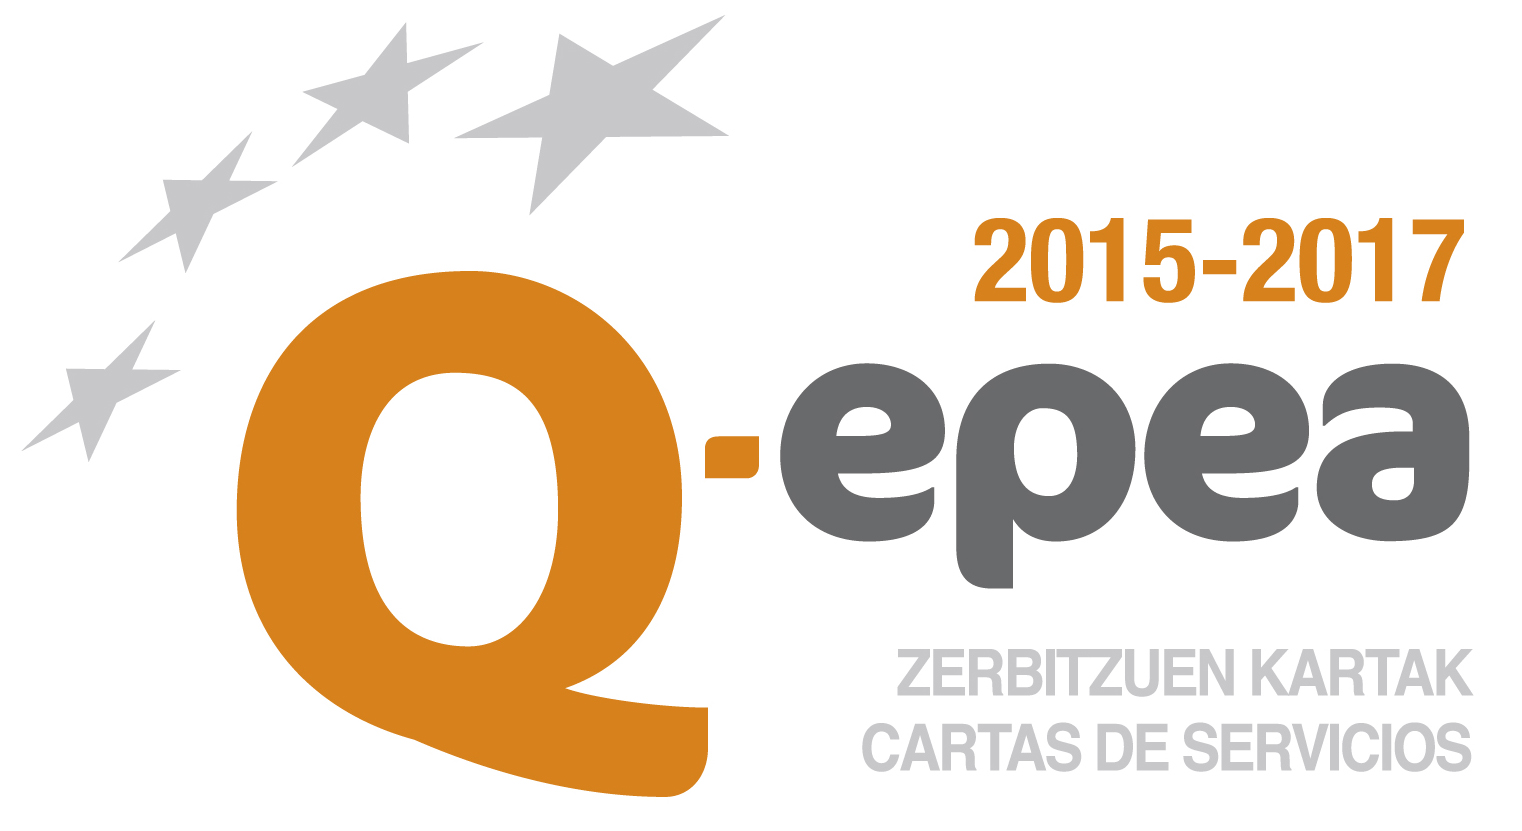 ZM Q-epea 2015-2017